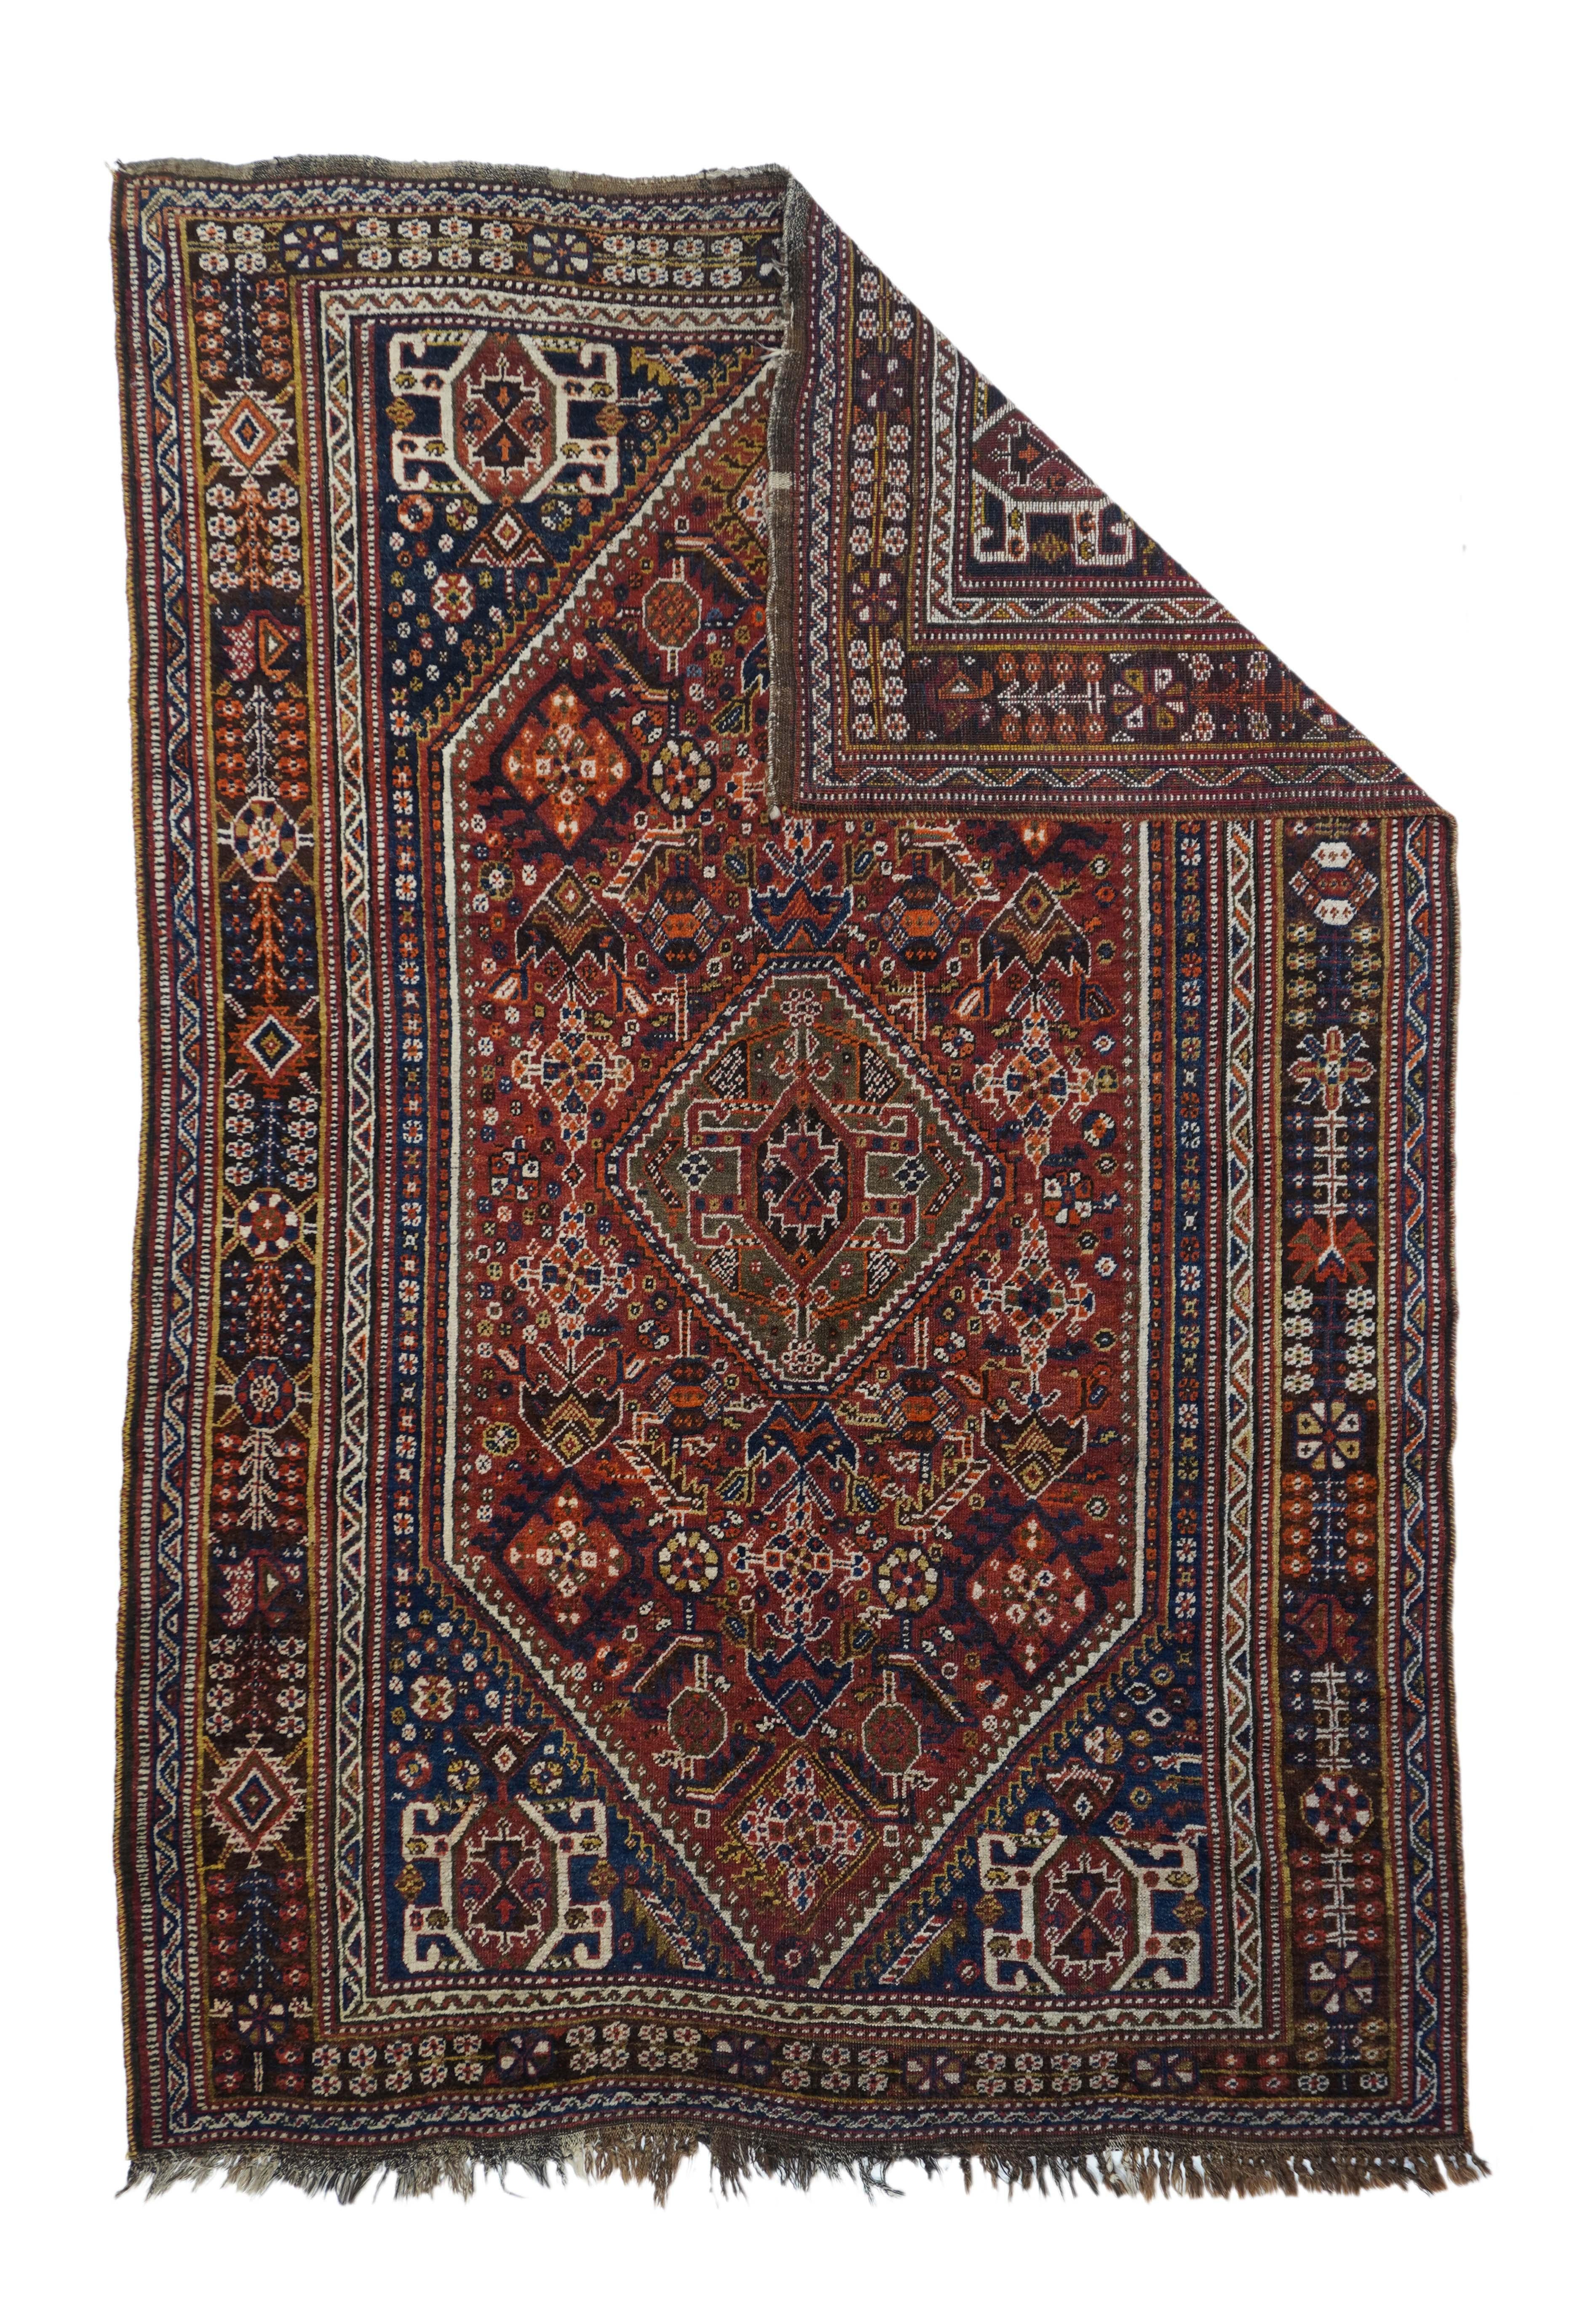 Antique Tribal Ghashgai rug 5'5'' x 8'6''. This moderately woven southwest Persian nomadic large scatter presents a very dark blue field with stylized 